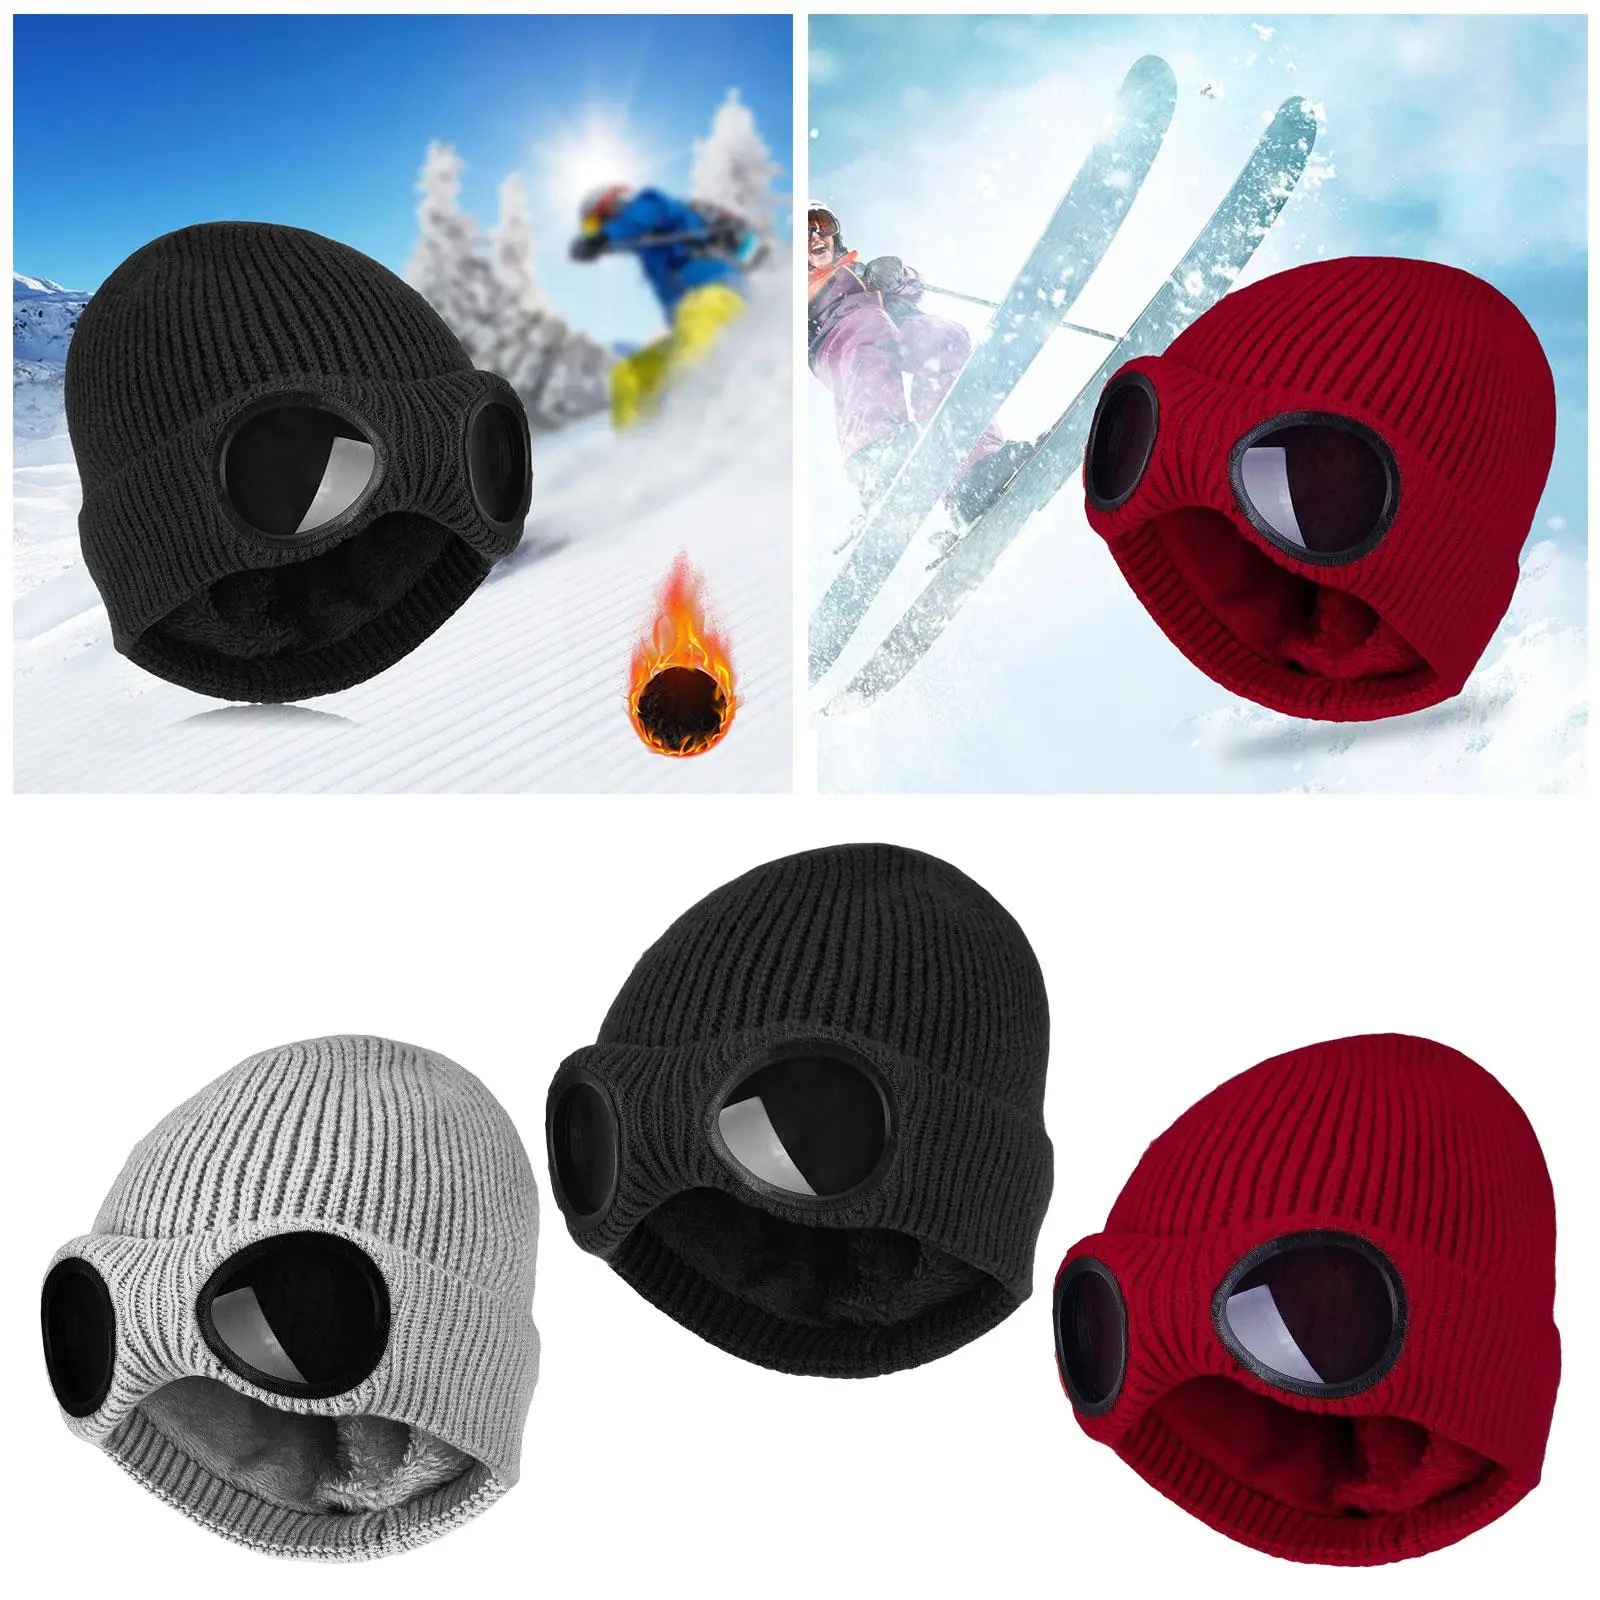 Winter Warm Knit Hats Plush Thermal Windproof Soft Multi-Function Caps Headgear Ski Caps for Men Women Adult Cycling Running